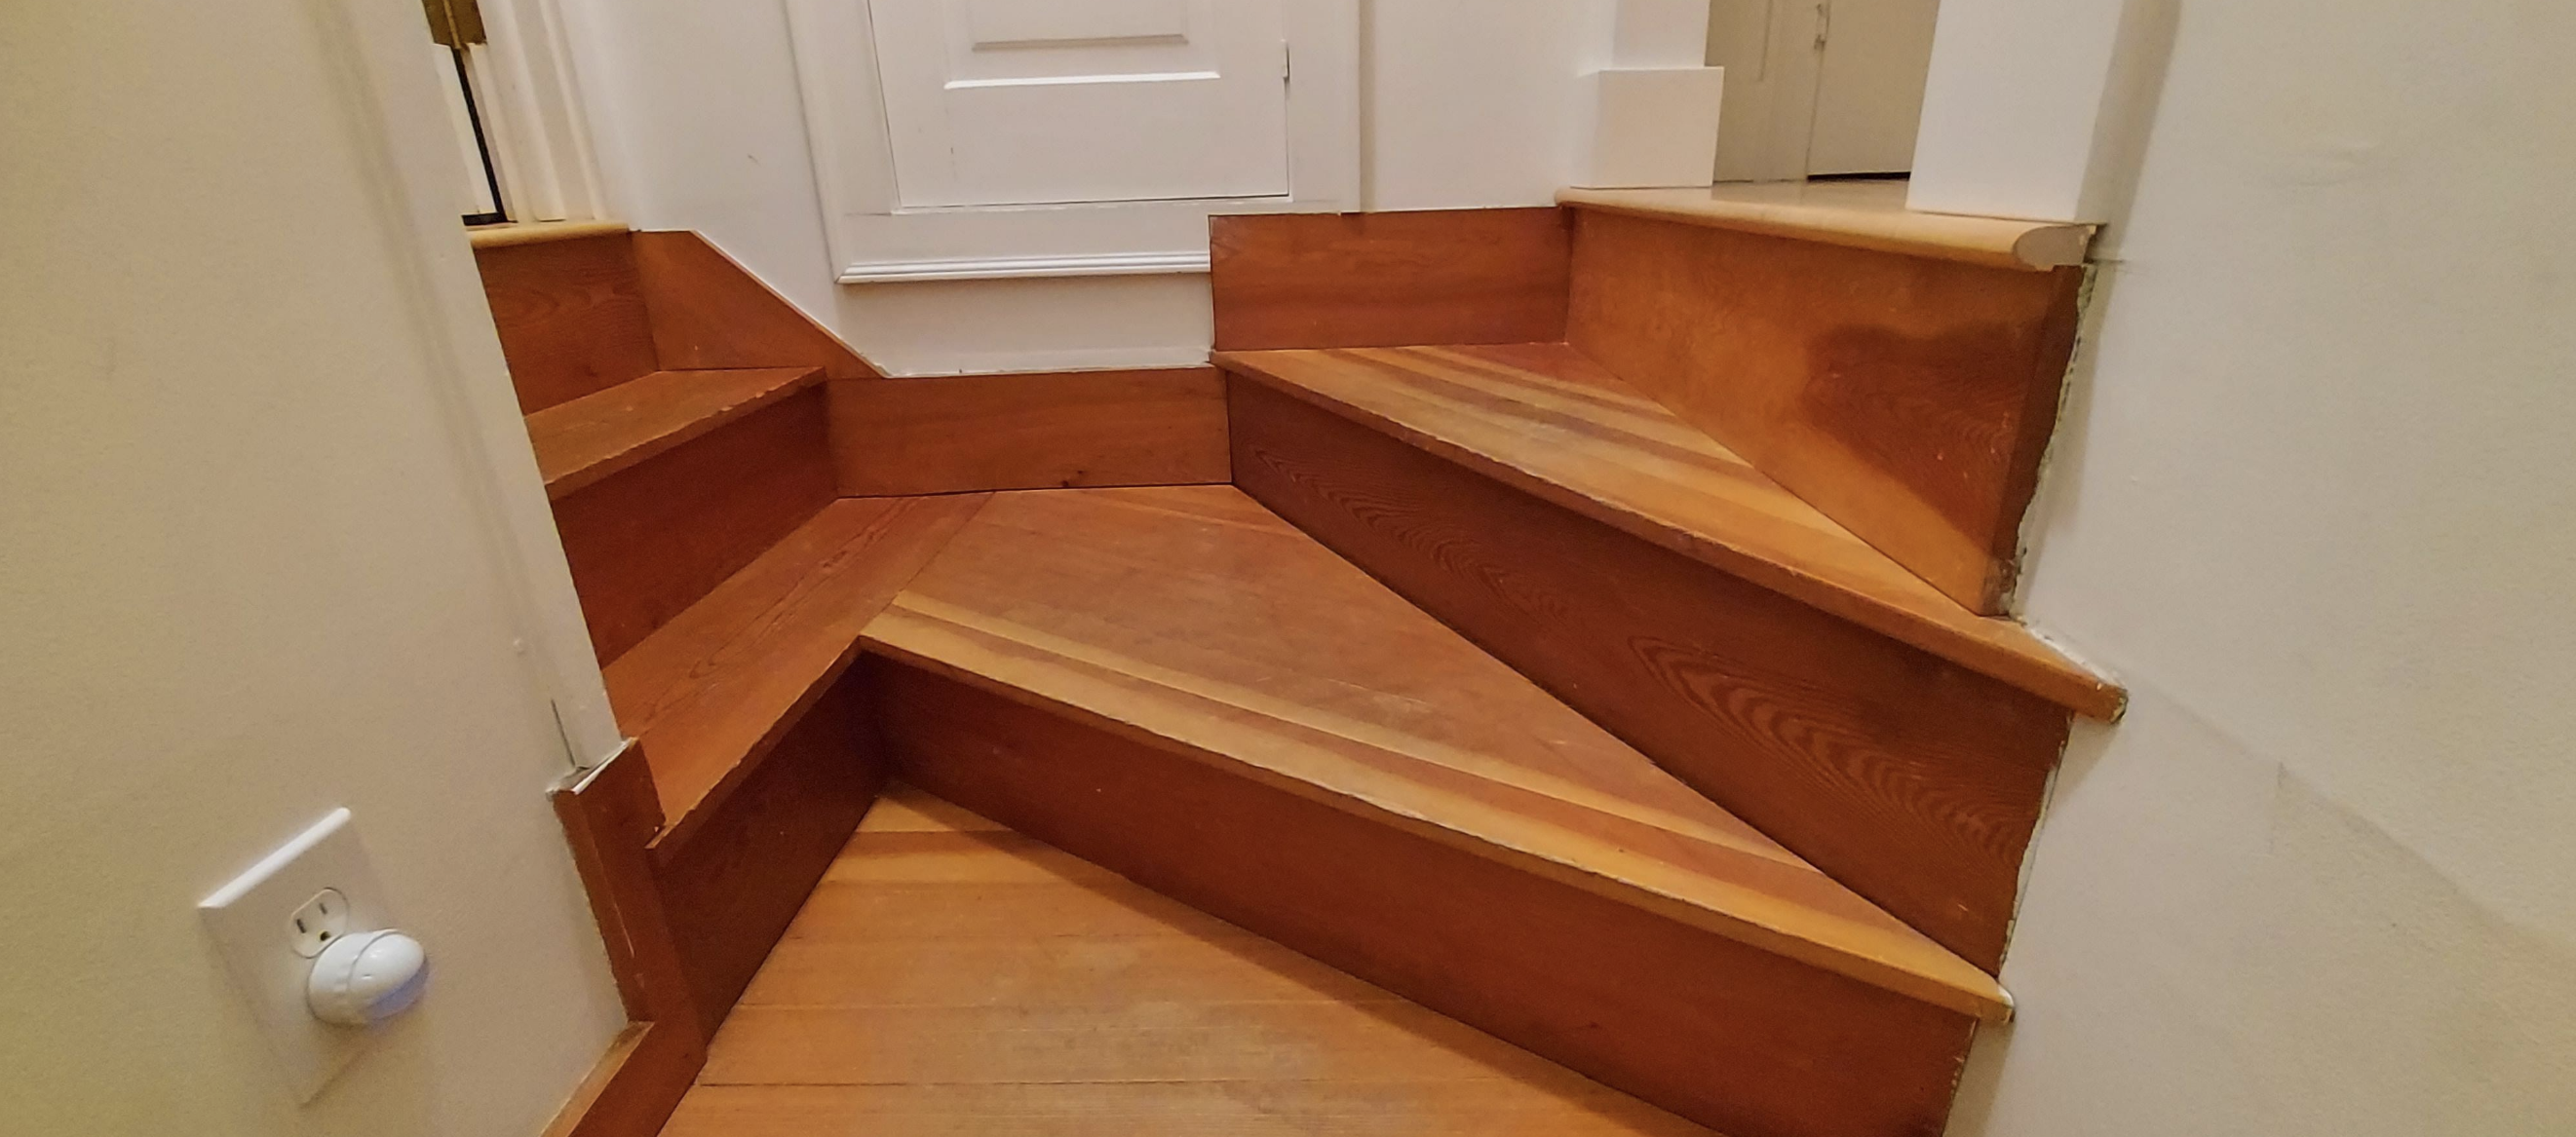 Different stairs coming into one